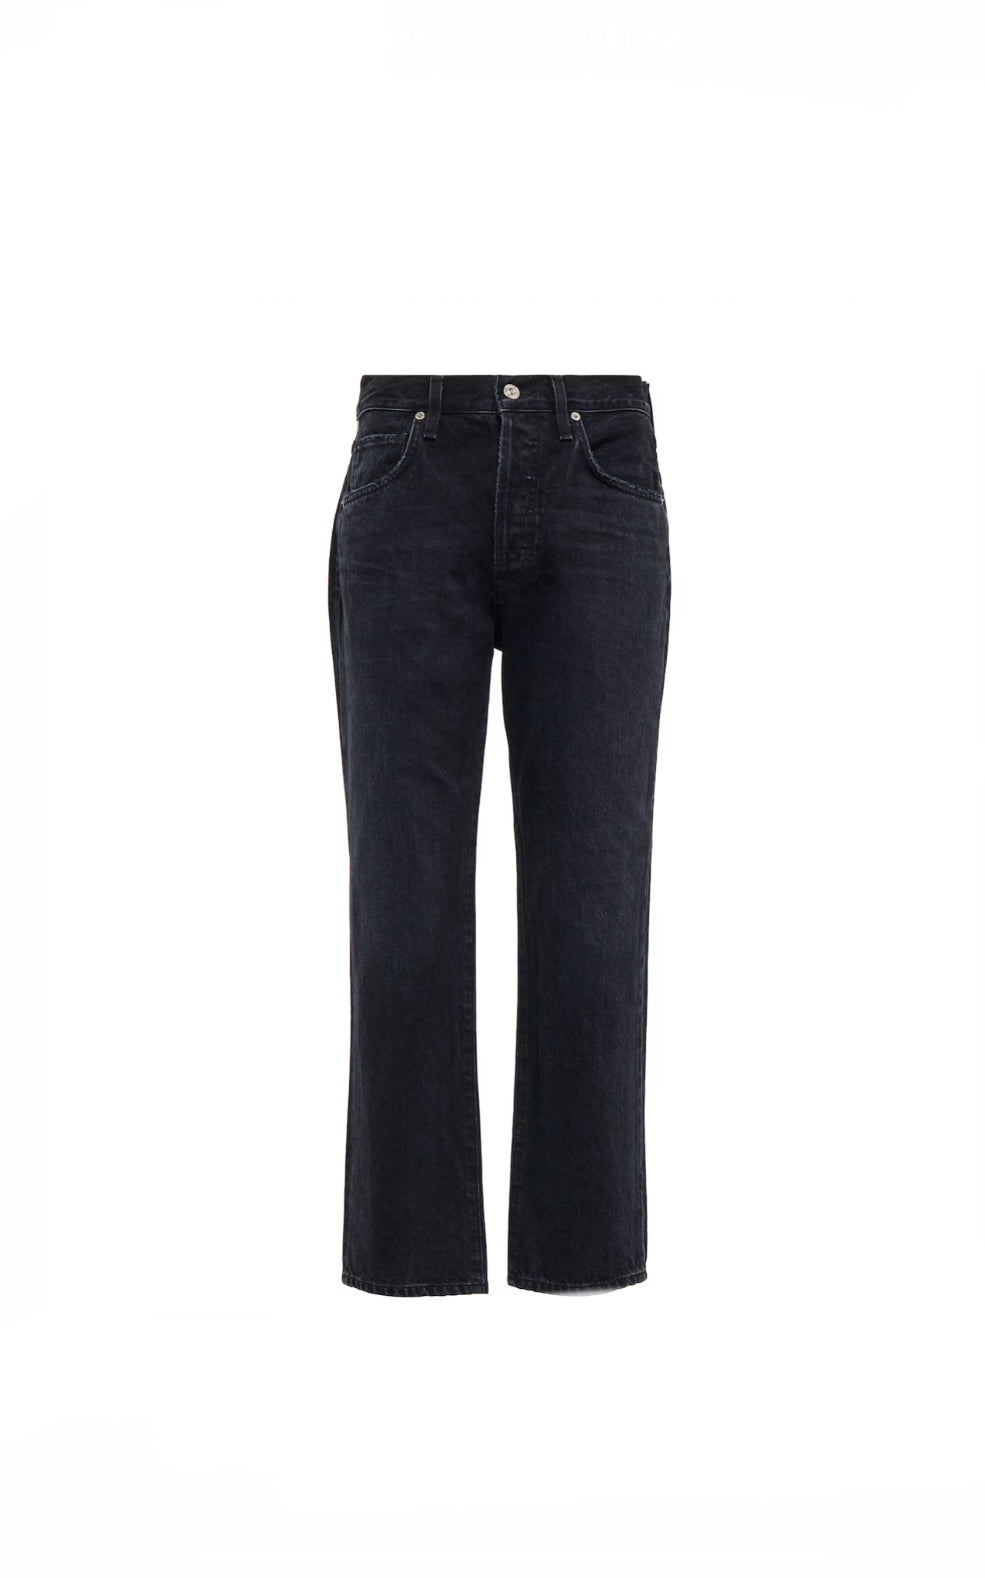 Citizens of Humanity Emery Cropped jeans